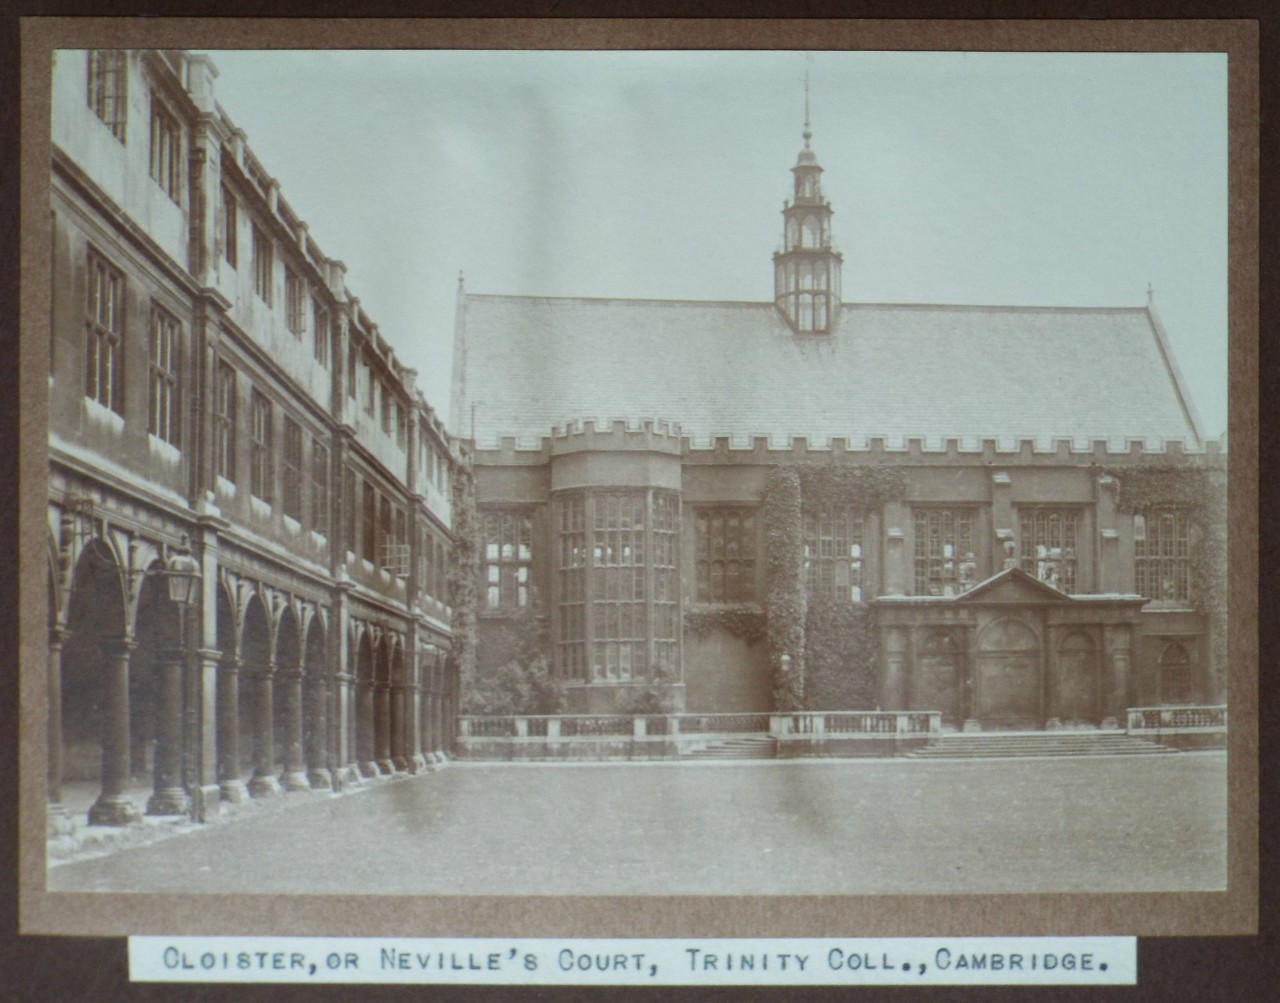 Photograph - Cloister, or Neville's Court, Trinity College, Cambridge.